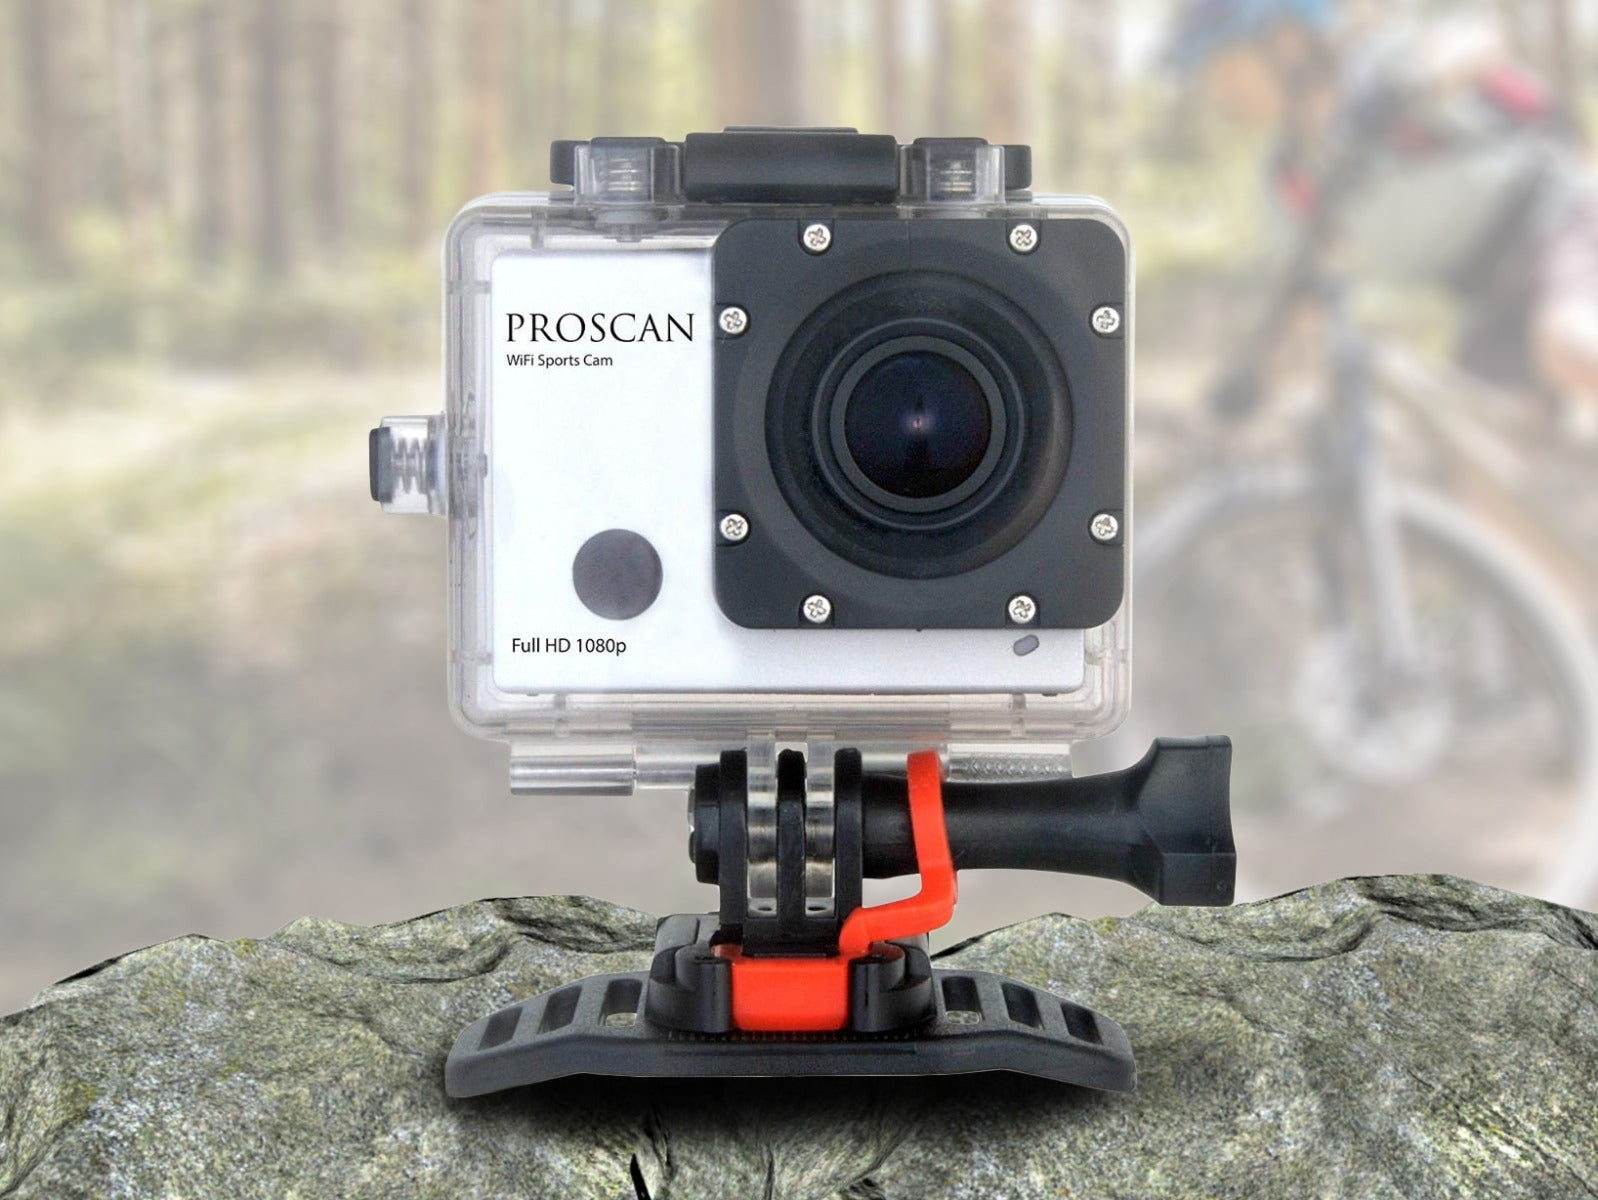 Proscan PAC2501 1080p Full HD Wi-Fi Action Camera